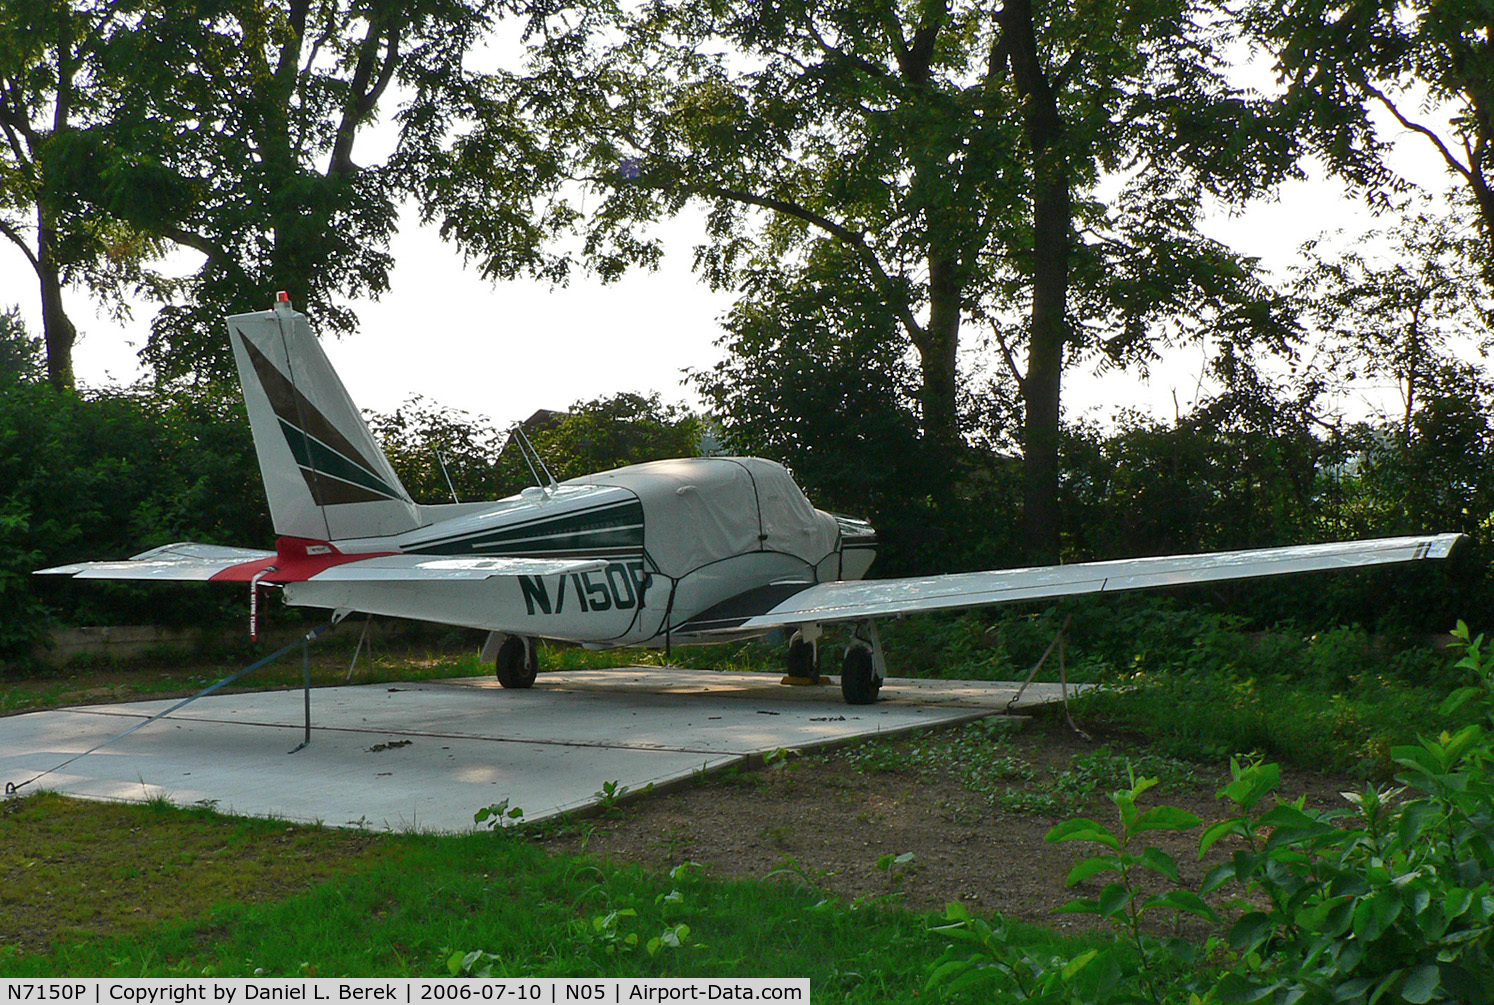 N7150P, 1960 Piper PA-24-250 Comanche C/N 24-2315, Beautifully turned out 1960 Comanche rests at home in Hackettstown.